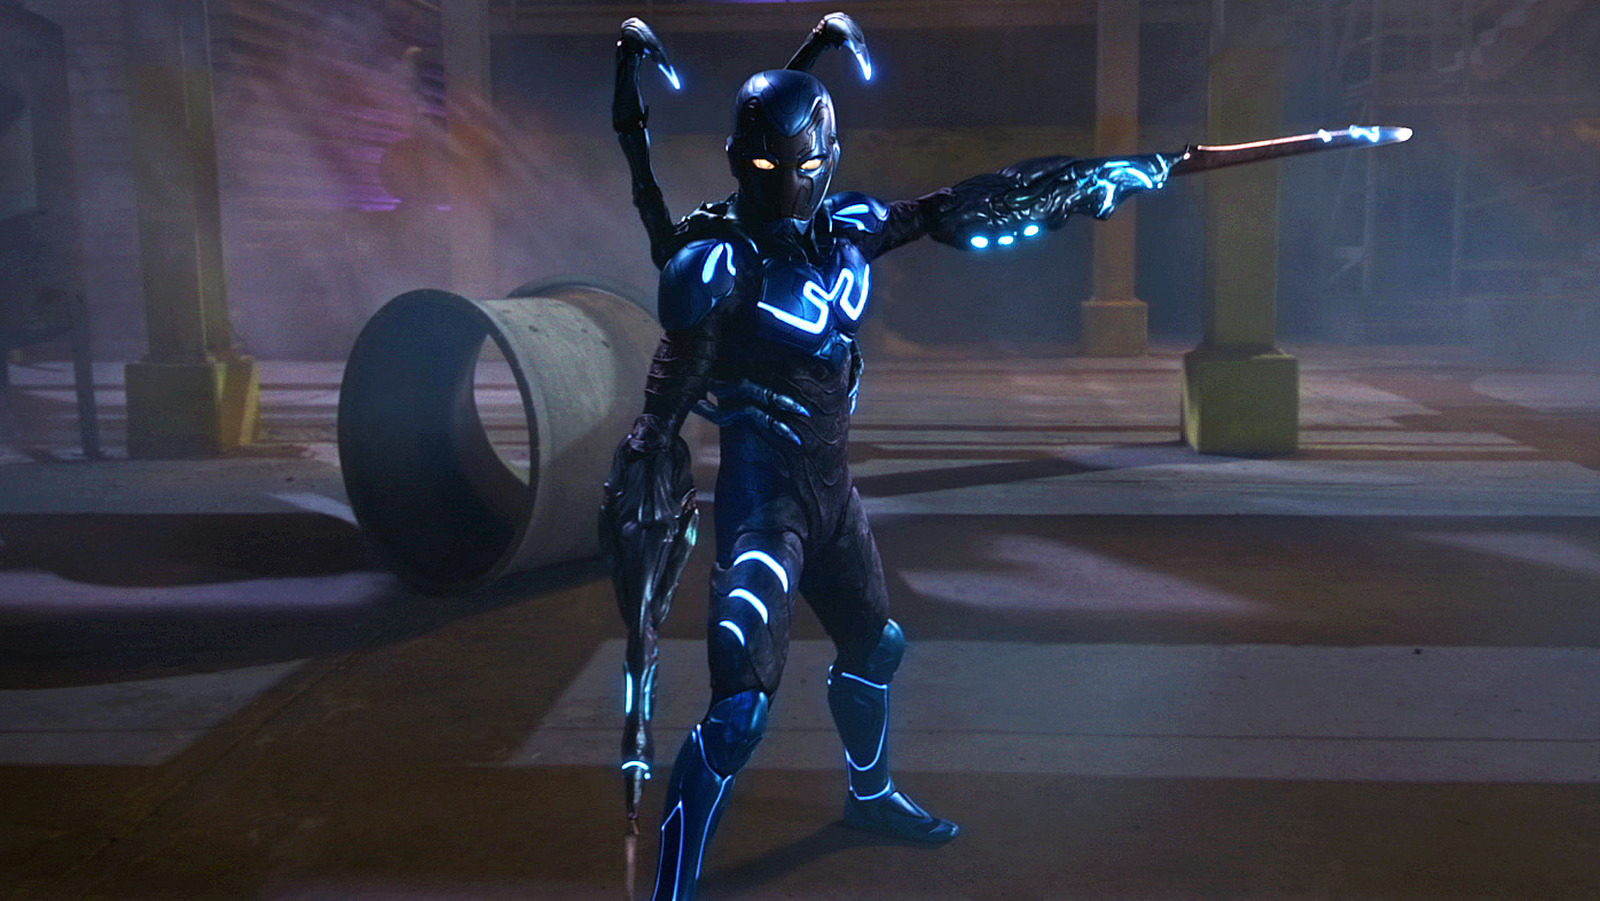 Blue Beetle 2 potential release date, cast and more